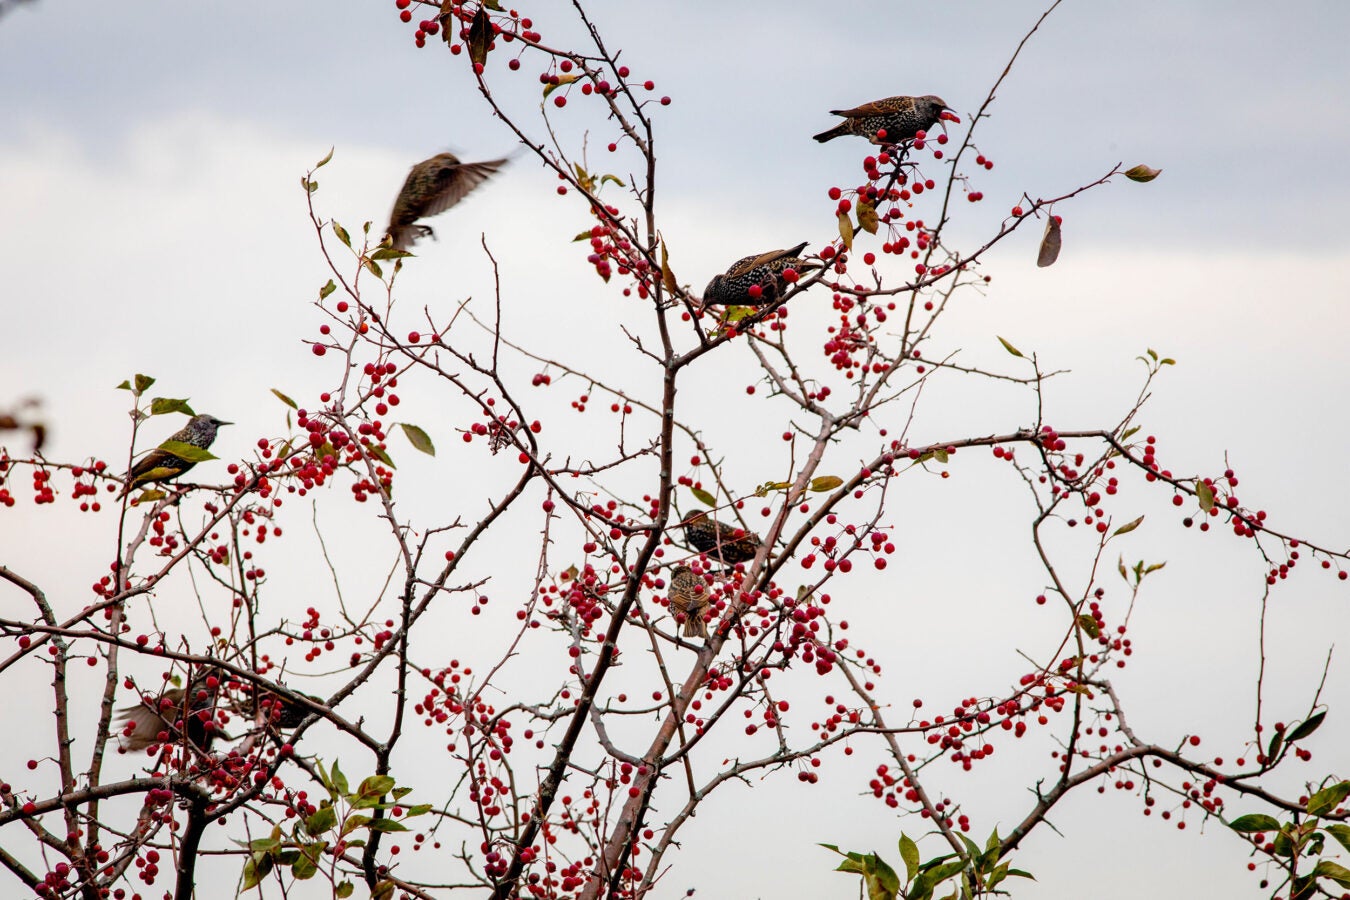 Birds compete for fruits in a tree on Peters Hill.